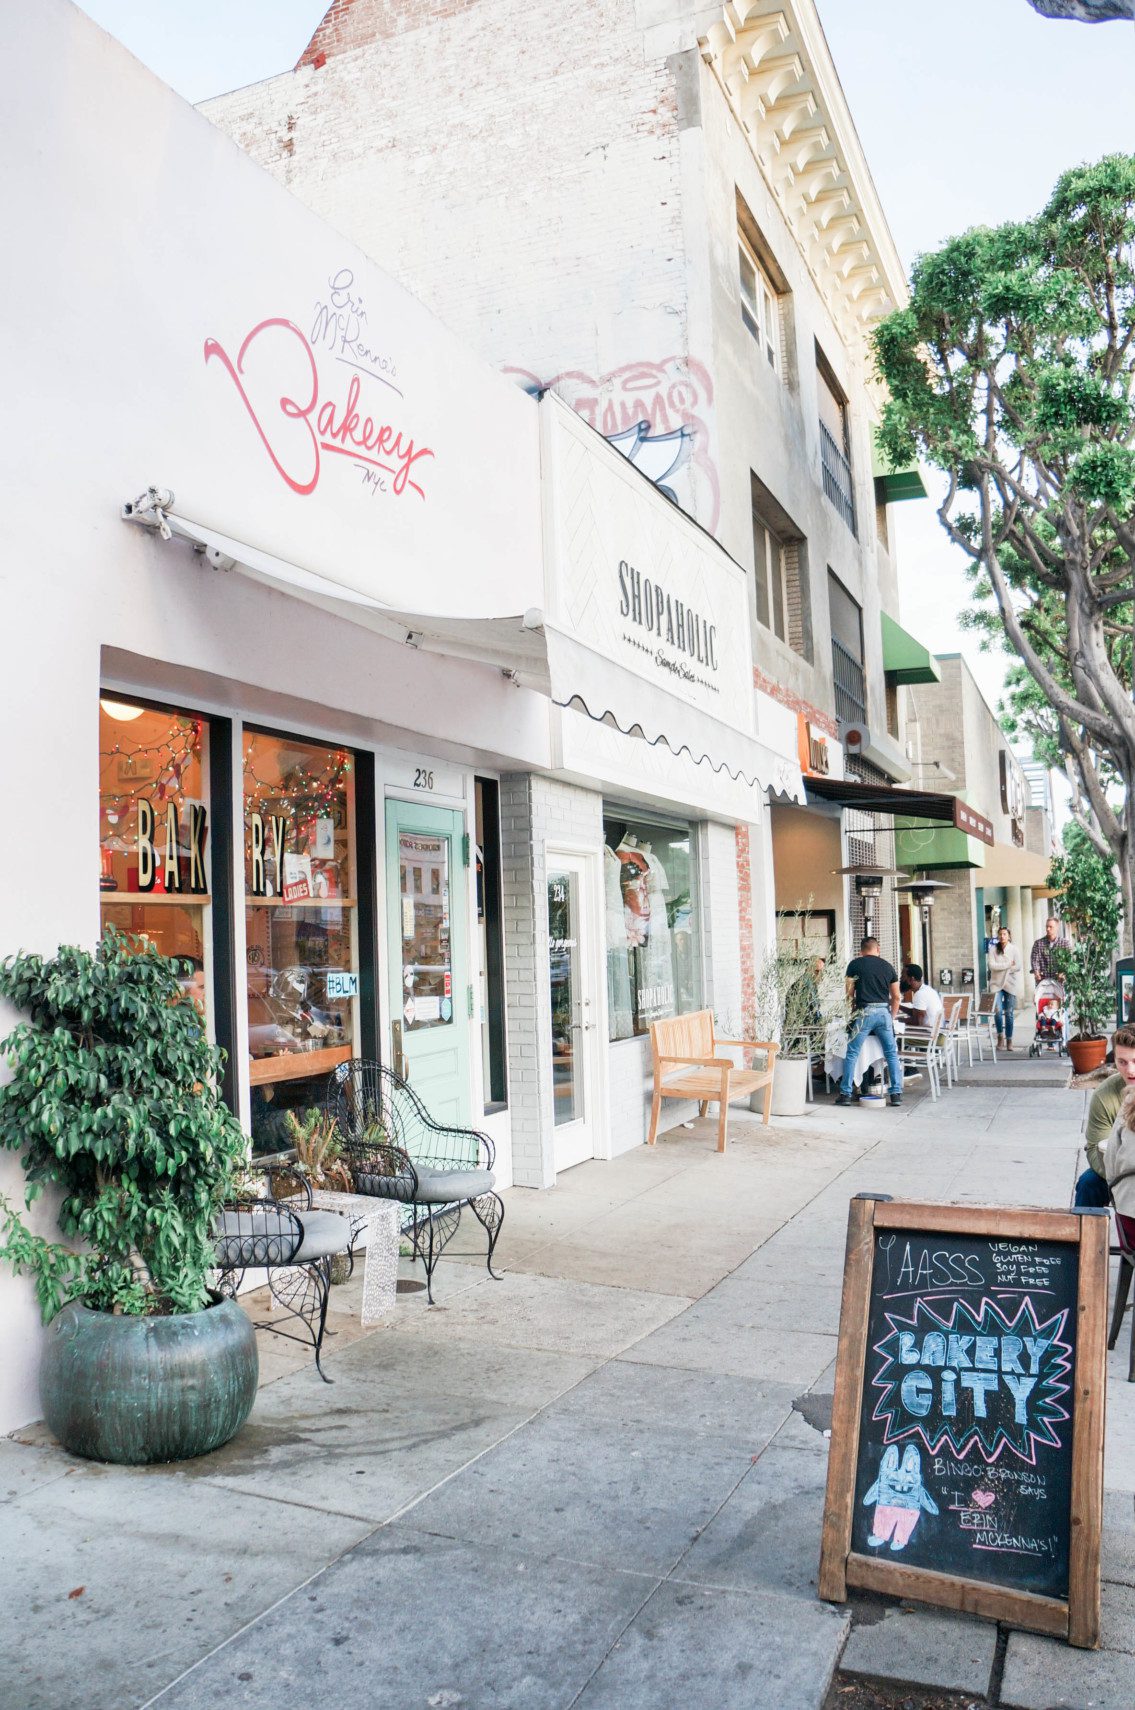 Where to eat, play, and shop in Larchmont Village, a quaint tree-lined street near the Hancock Park neighborhood of Los Angeles.